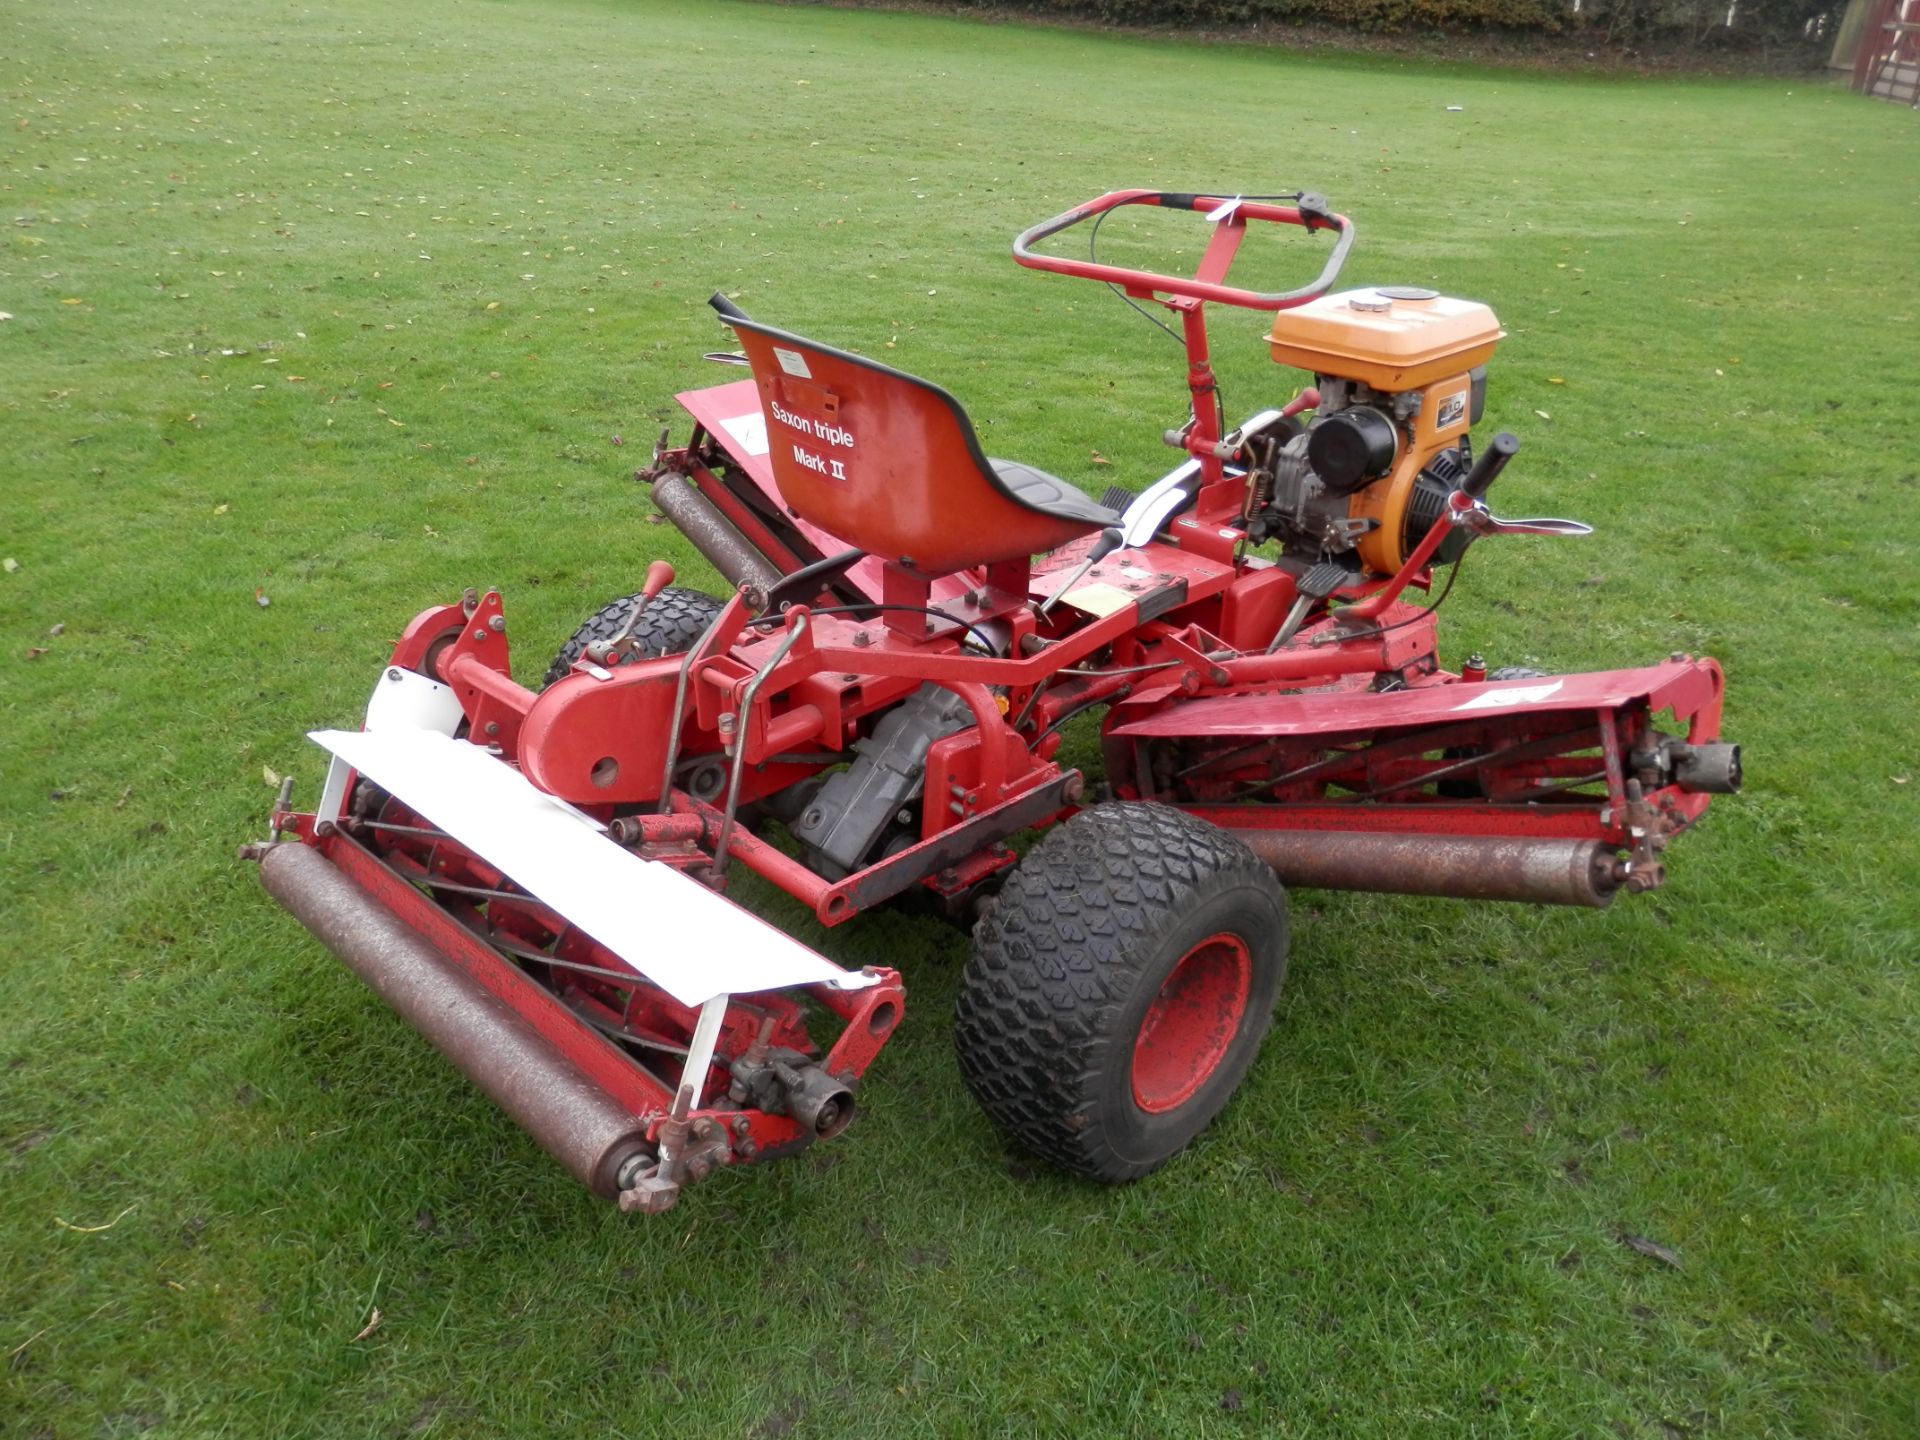 ALL WORKING SAXON TRIPLE MK2 RIDE ON MOWER, UPGRADED WITH GEARS, BRAKE PEDAL & DIFF LOCK. - Image 6 of 14